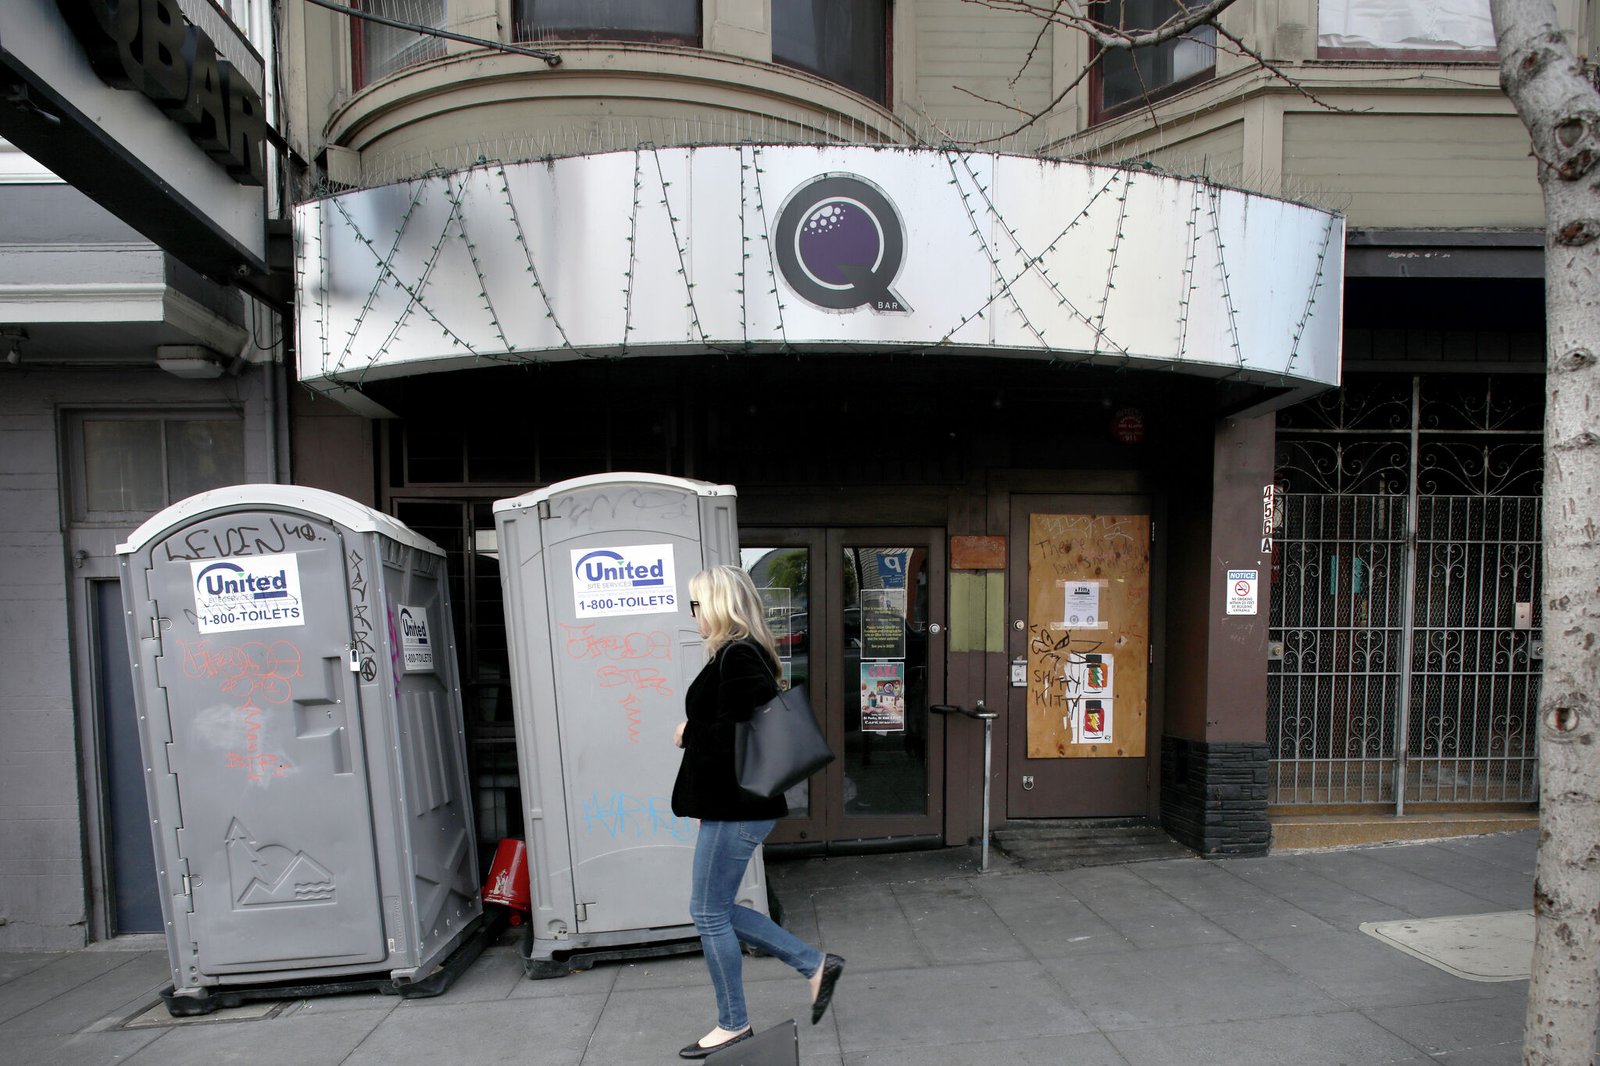 SF gay bar to reopen this spring after devastating 2019 fire